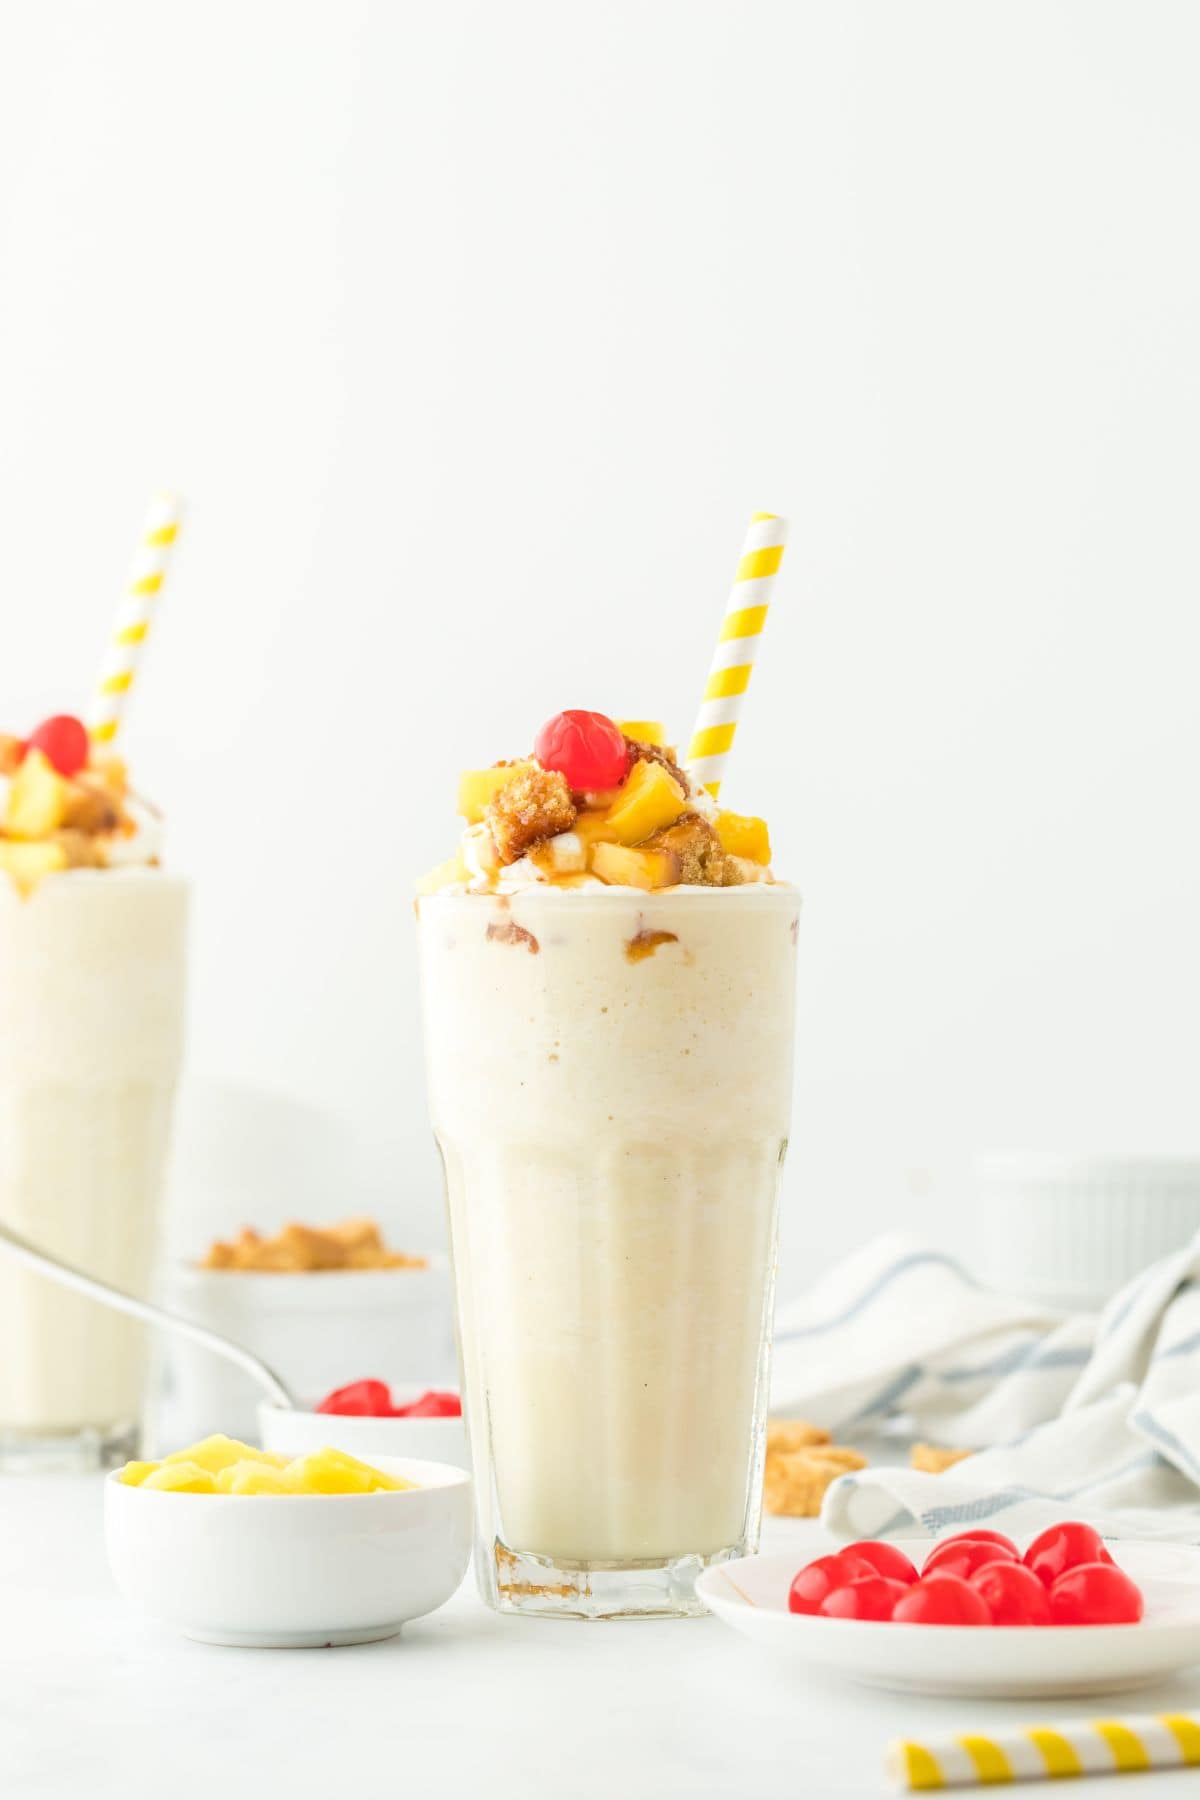 Two glasses of pineapple milkshakes on a table with yellow and white straws.